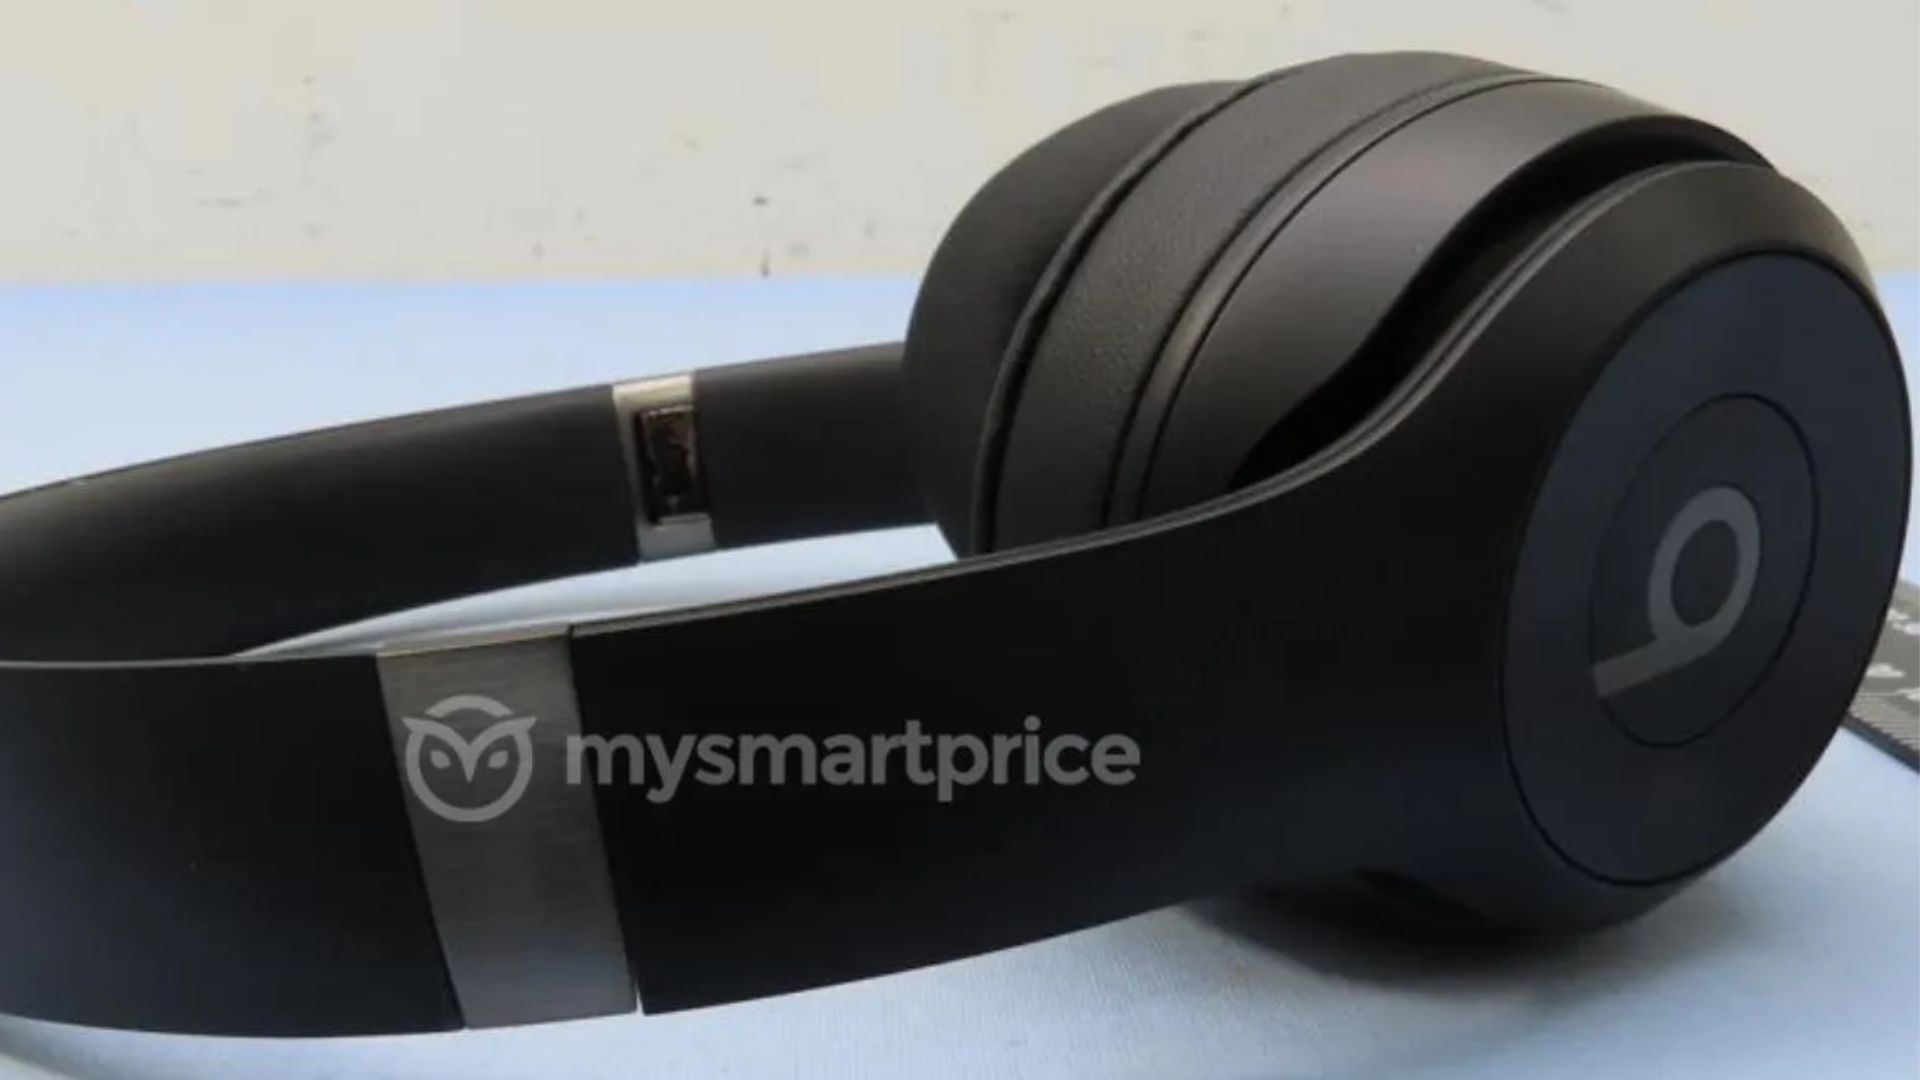 The Beats Solo 4 look remarkably similar to their predecessor.